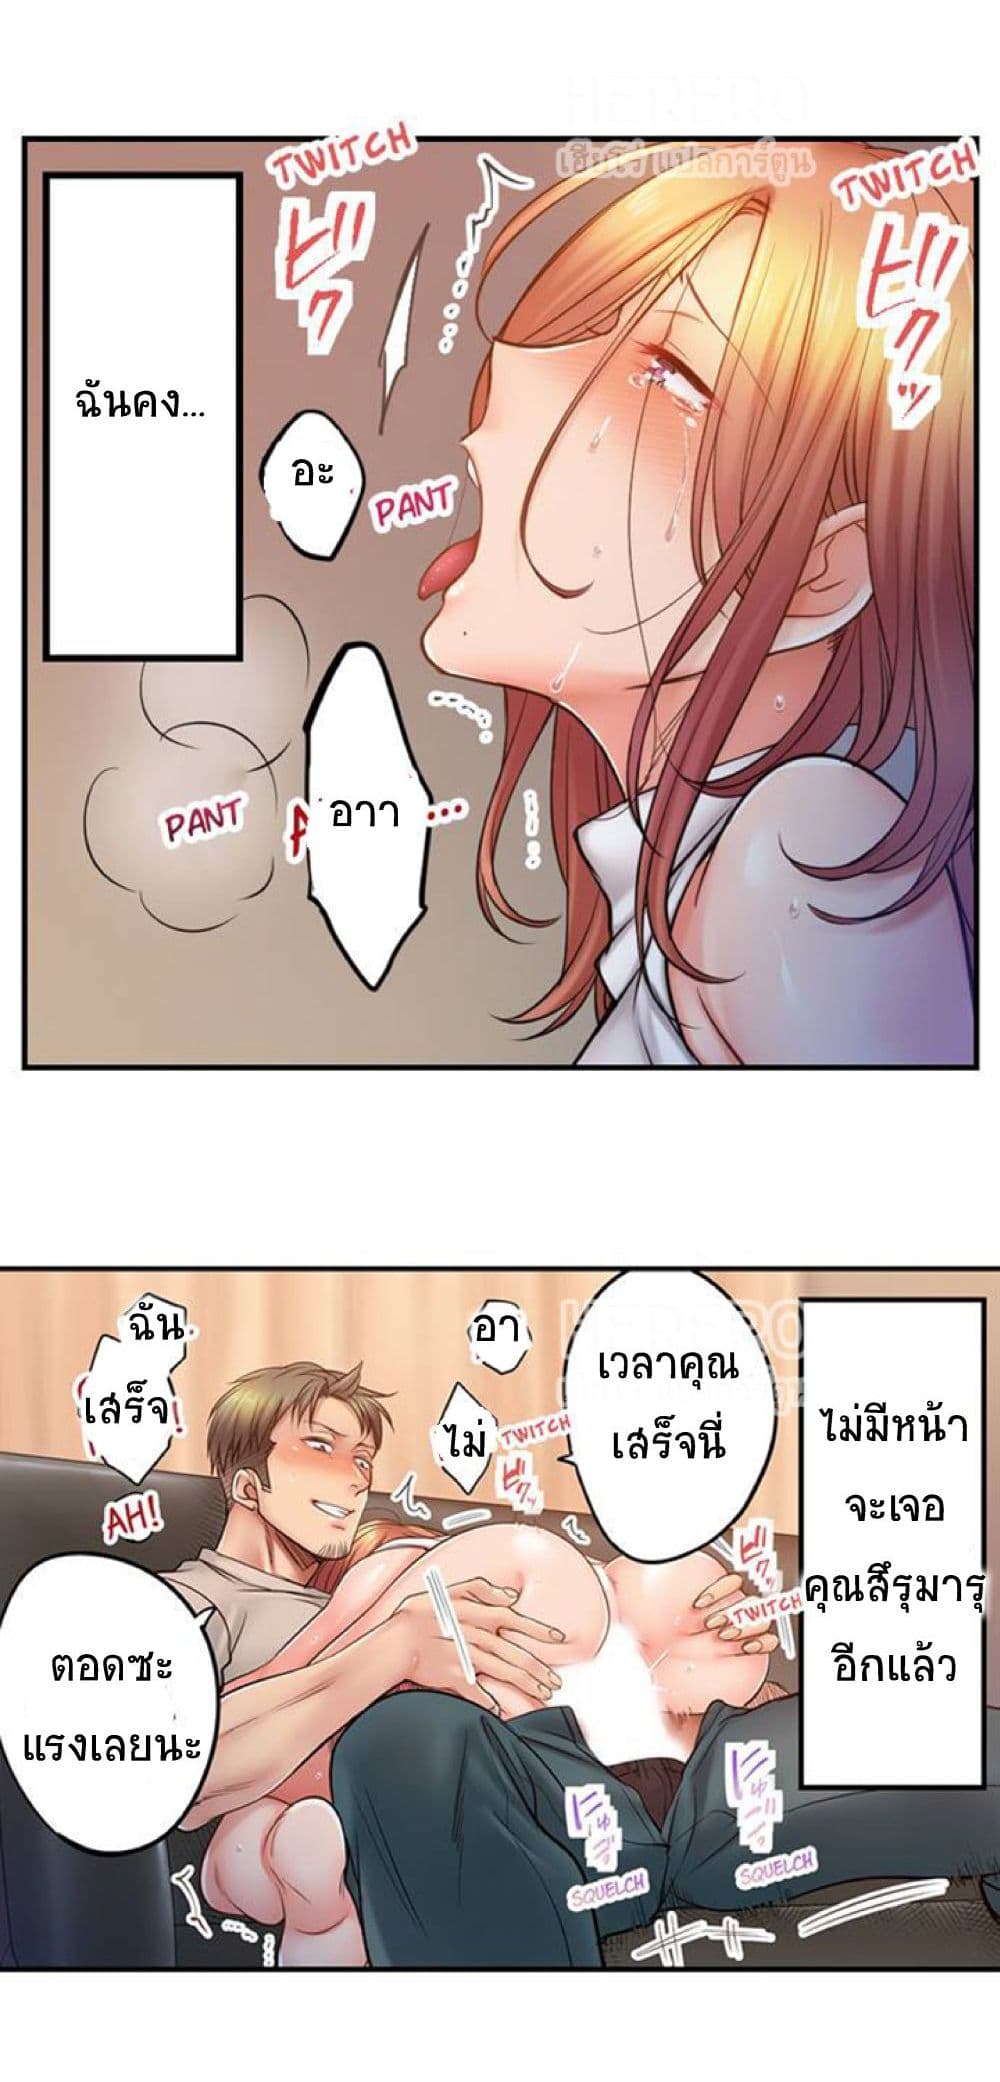 I Can't Resist His Massage! Cheating in Front ร ยธโ€ขร ยธยญร ยธโขร ยธโ€”ร ยธยตร ยนห93 (10)